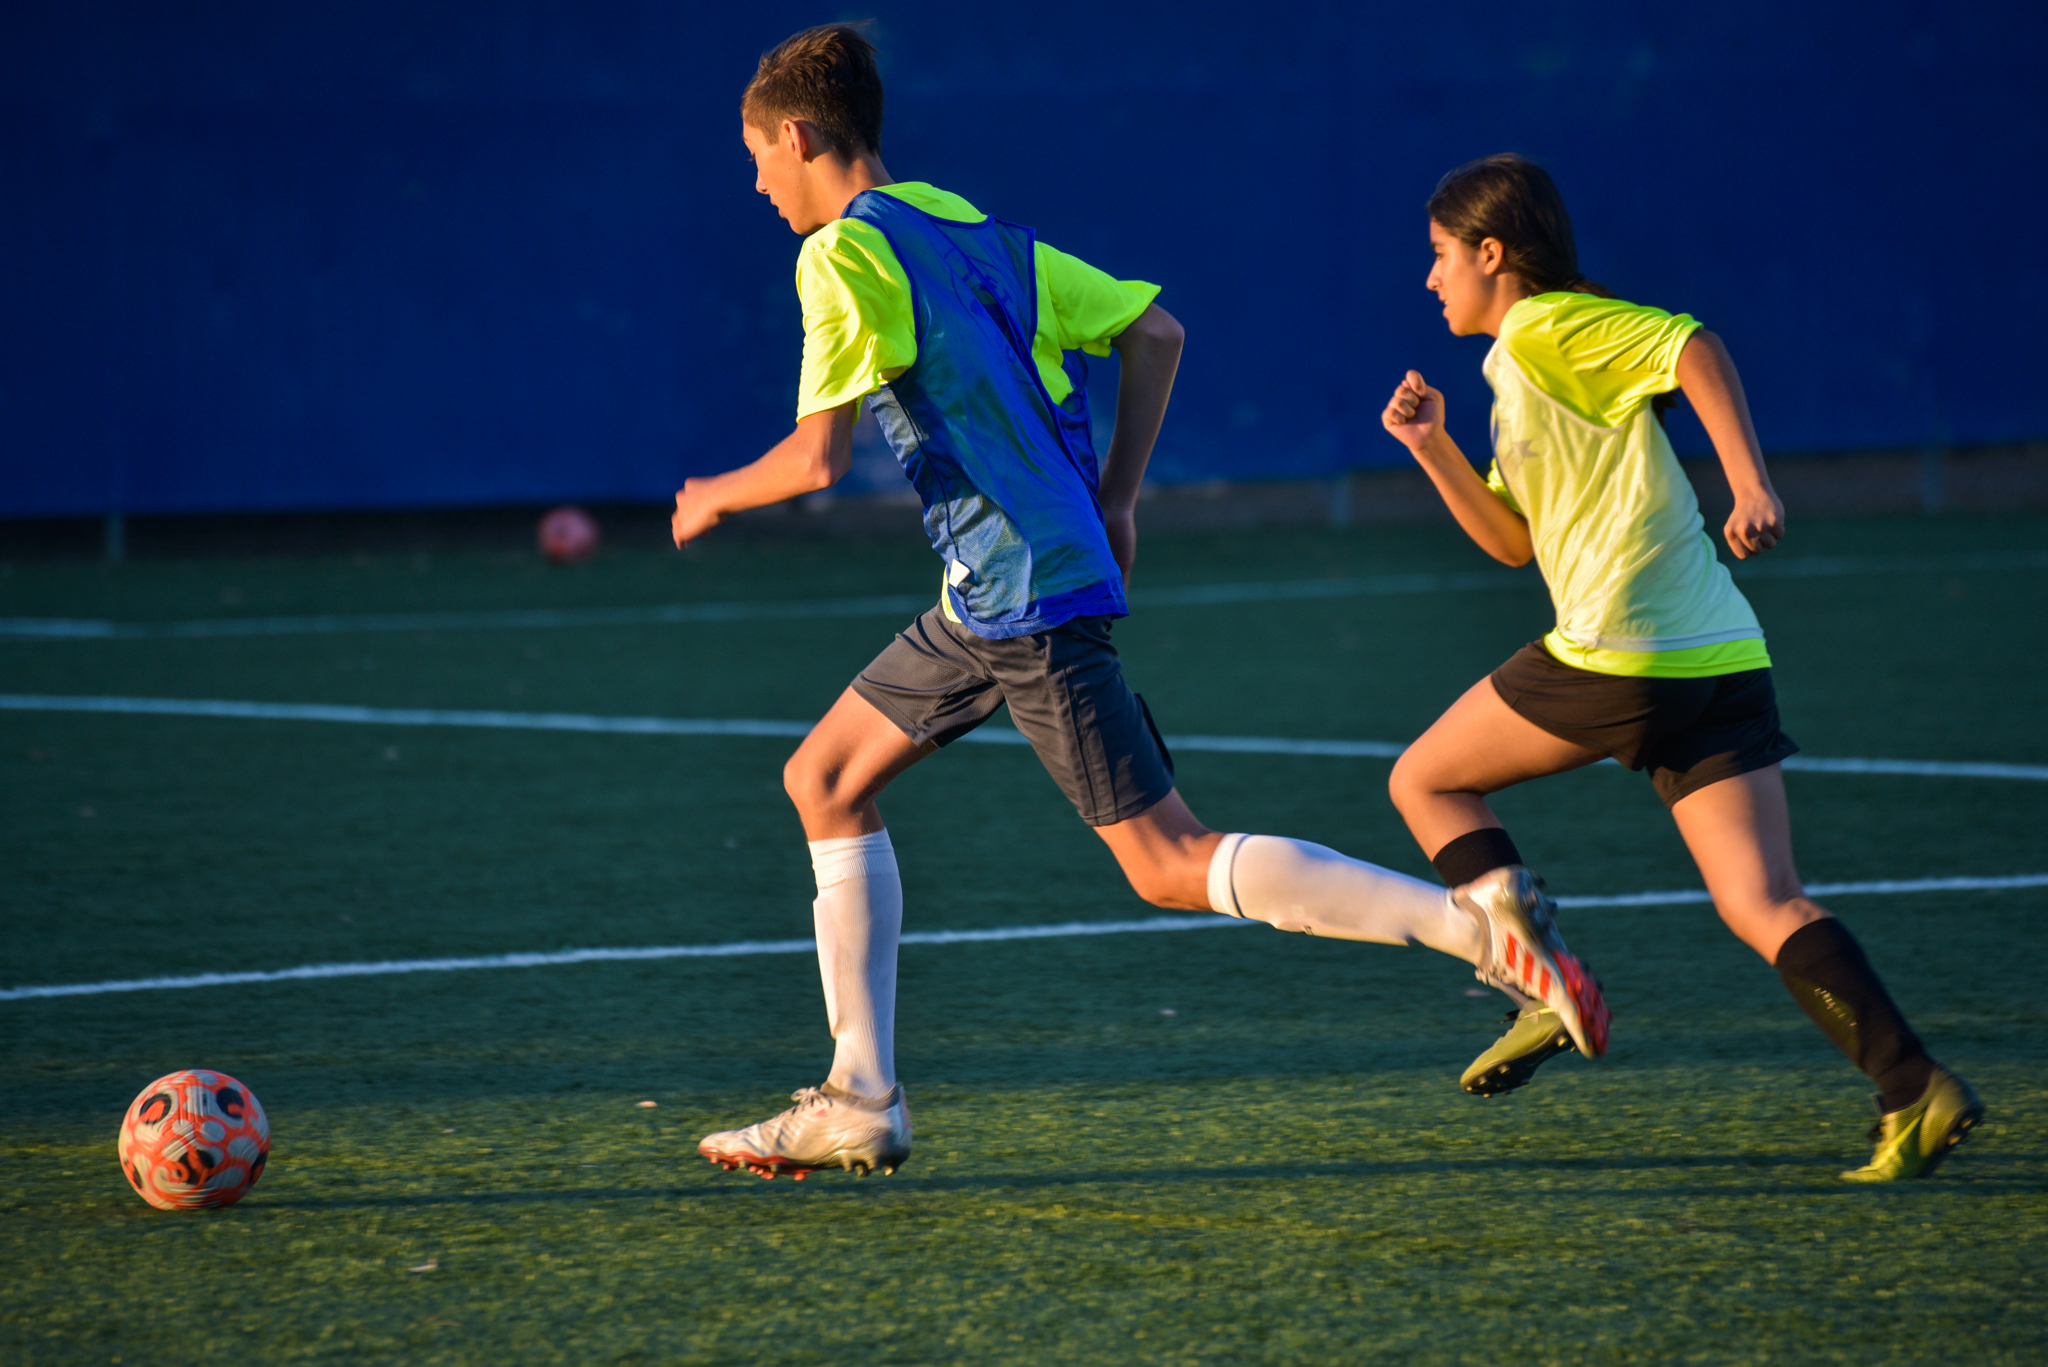 College of the Canyons youth soccer programs stock image.